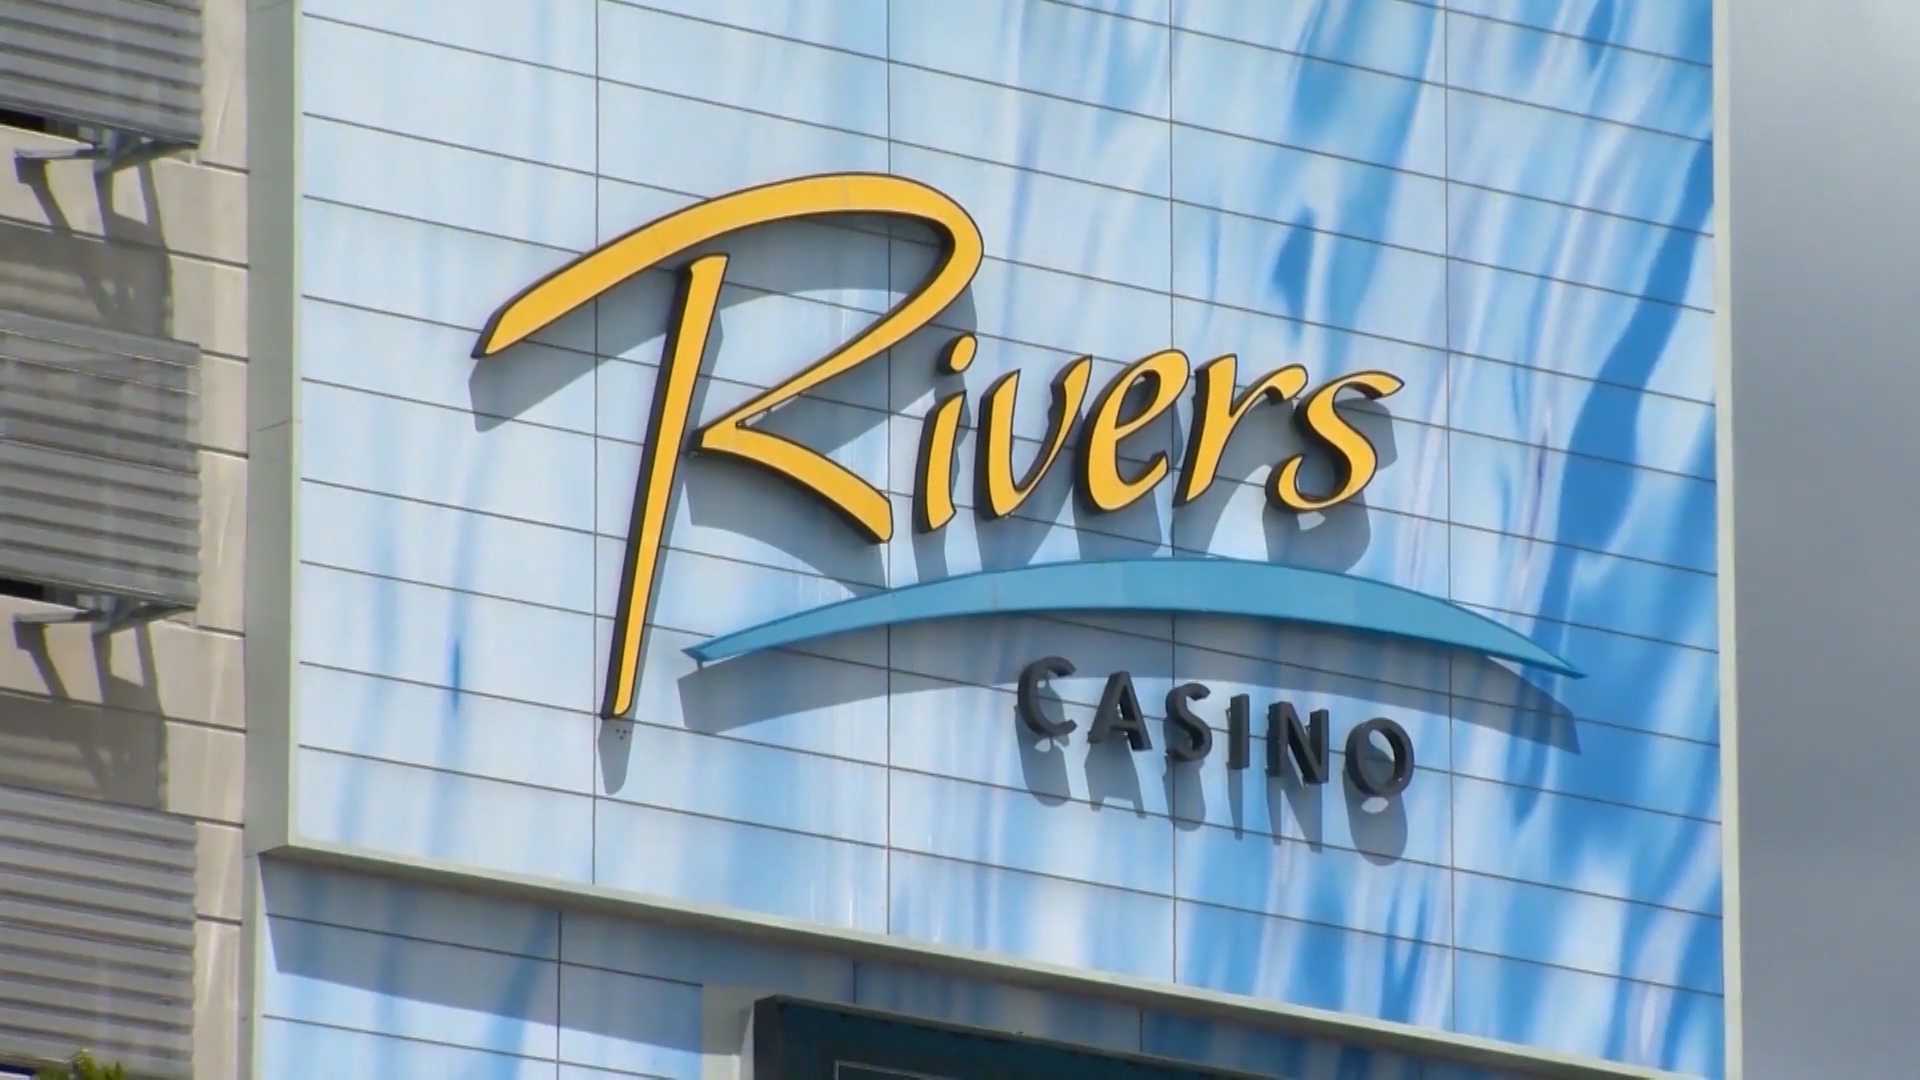 rivers casino points to cash